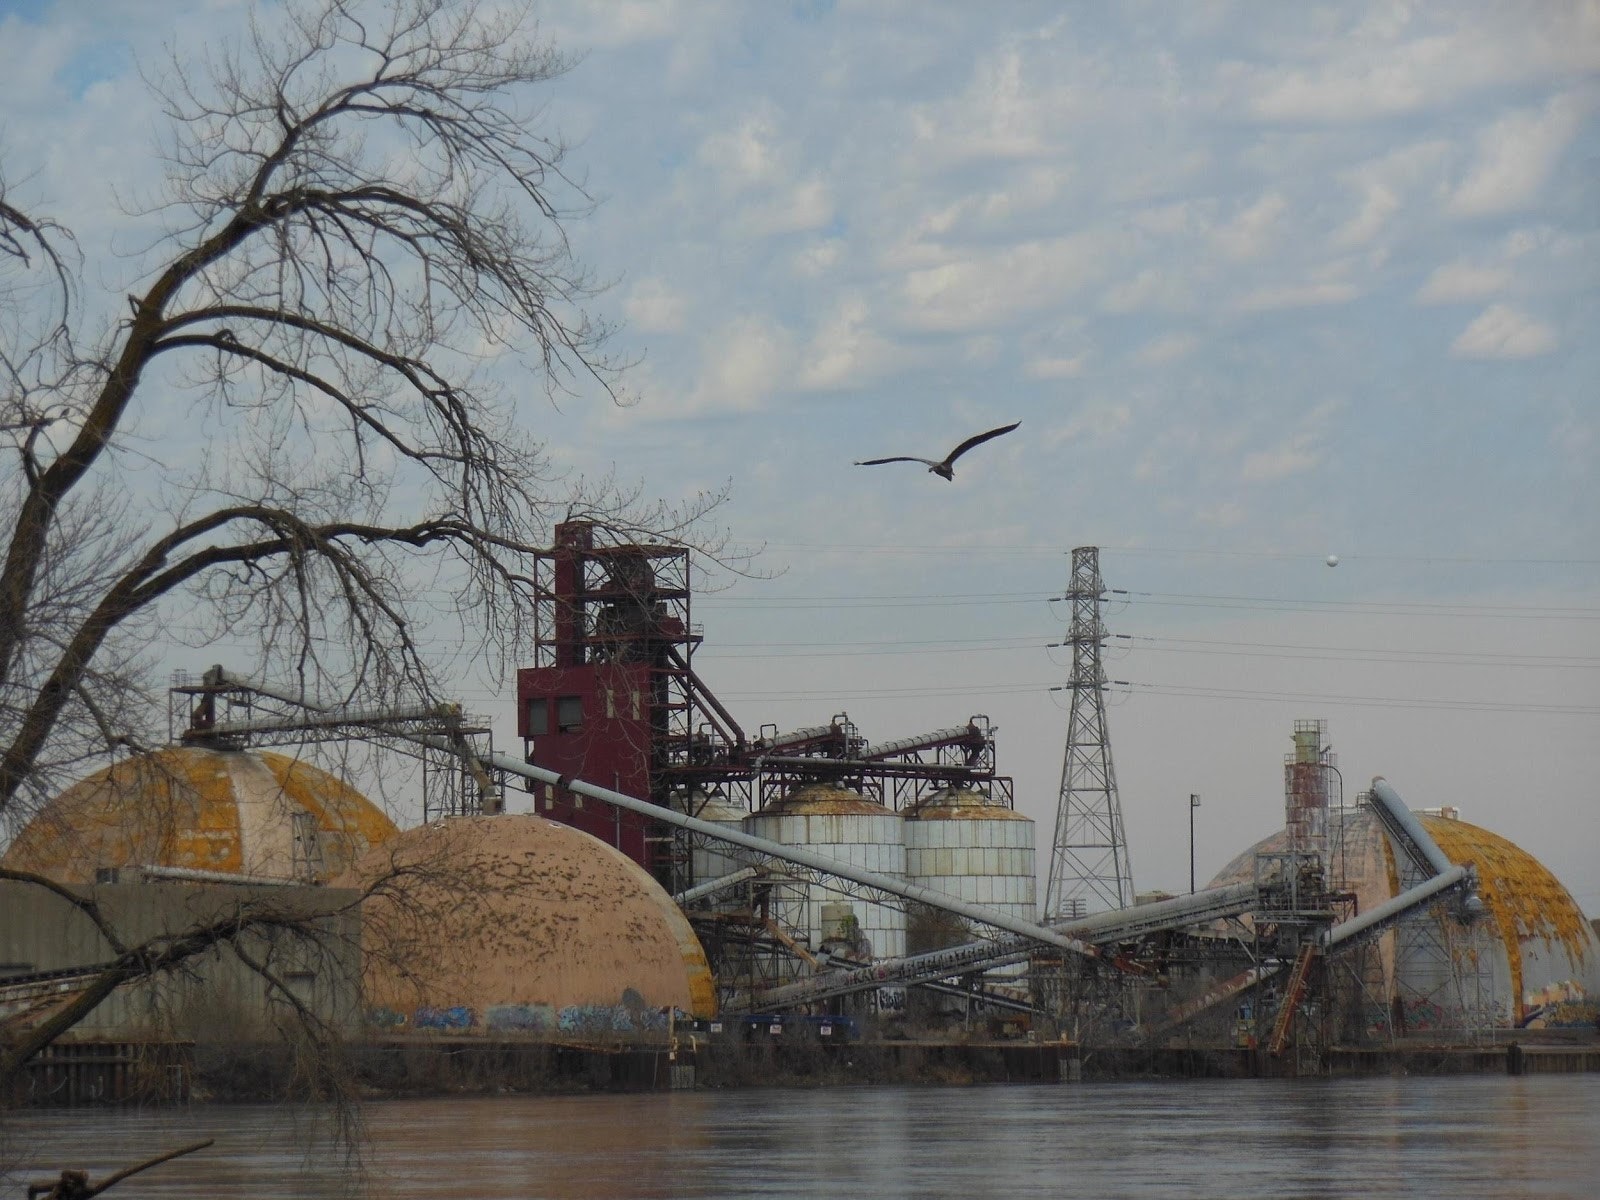 A port with large dome buildings and silos stands on the banks of the Mississippi river.